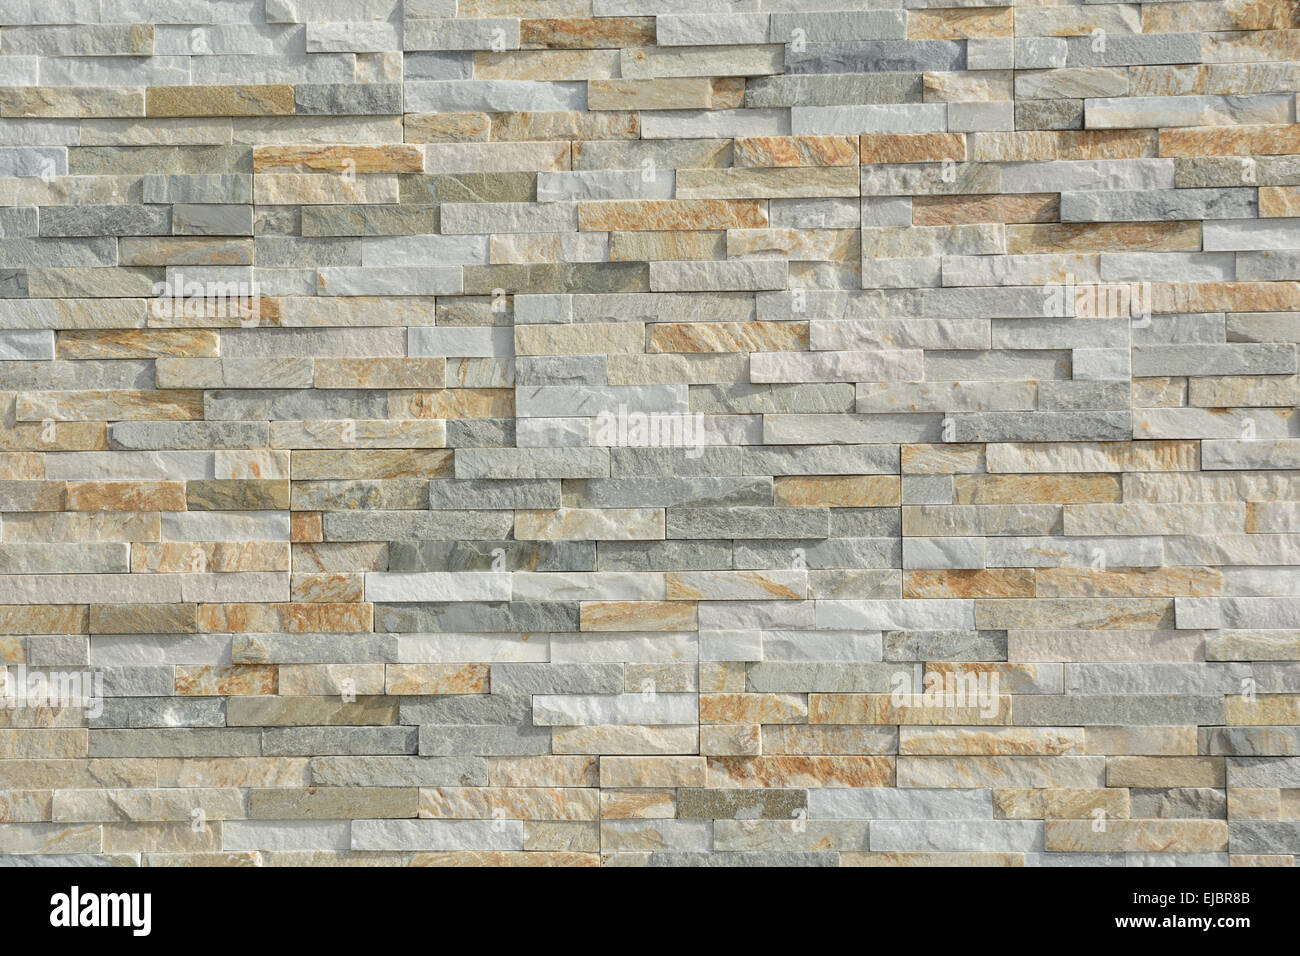 Natural stones form a pattern Stock Photo